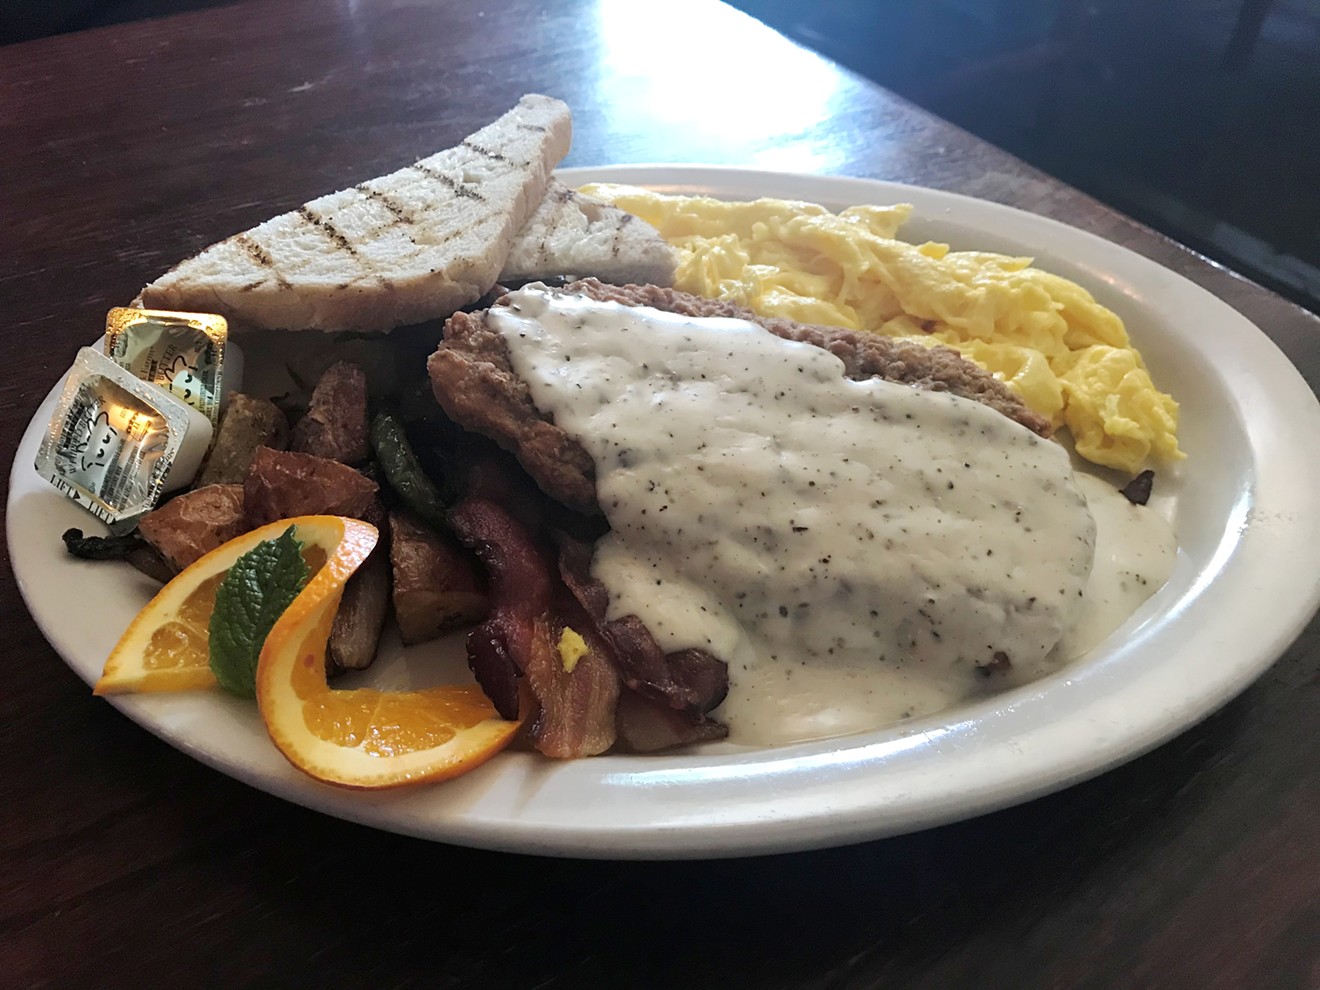 Chicken-fried steak makes for a hearty brunch at Hanson's.